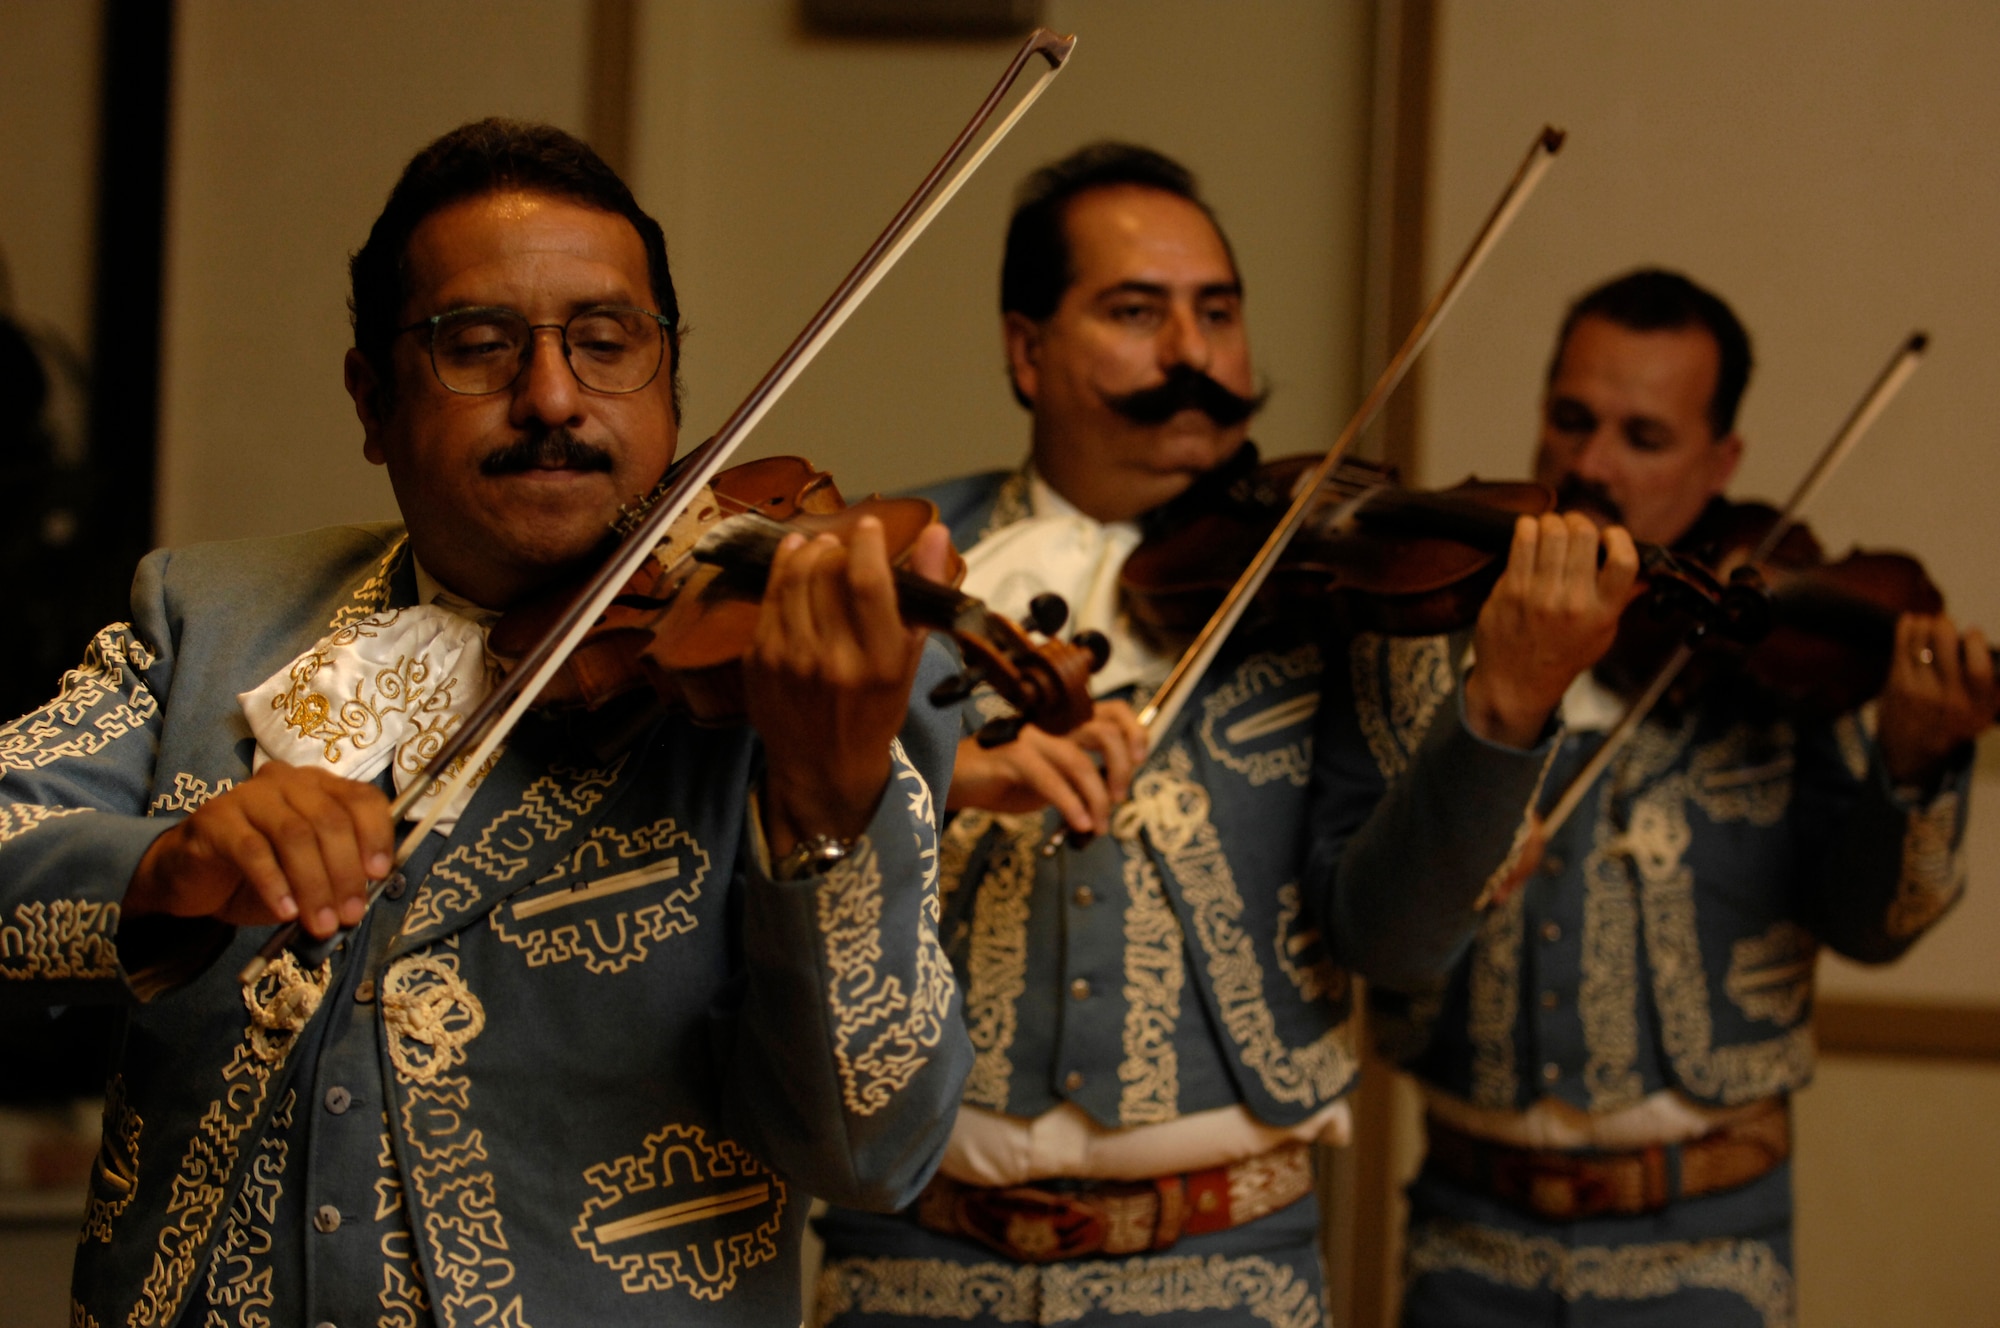 VANDENBERG AIR FORCE BASE, Calif. -- Members of Mariachi Lobos play the violin during a live performance at the Cultural Heritage Day here on Aug.10, 2008. Vandenberg's Cultural Heritage Day combined all annual cultural observances into one gala event of food, music, dance and displays. (U.S. Air Force photo/Airman 1st Class Christian Thomas)

